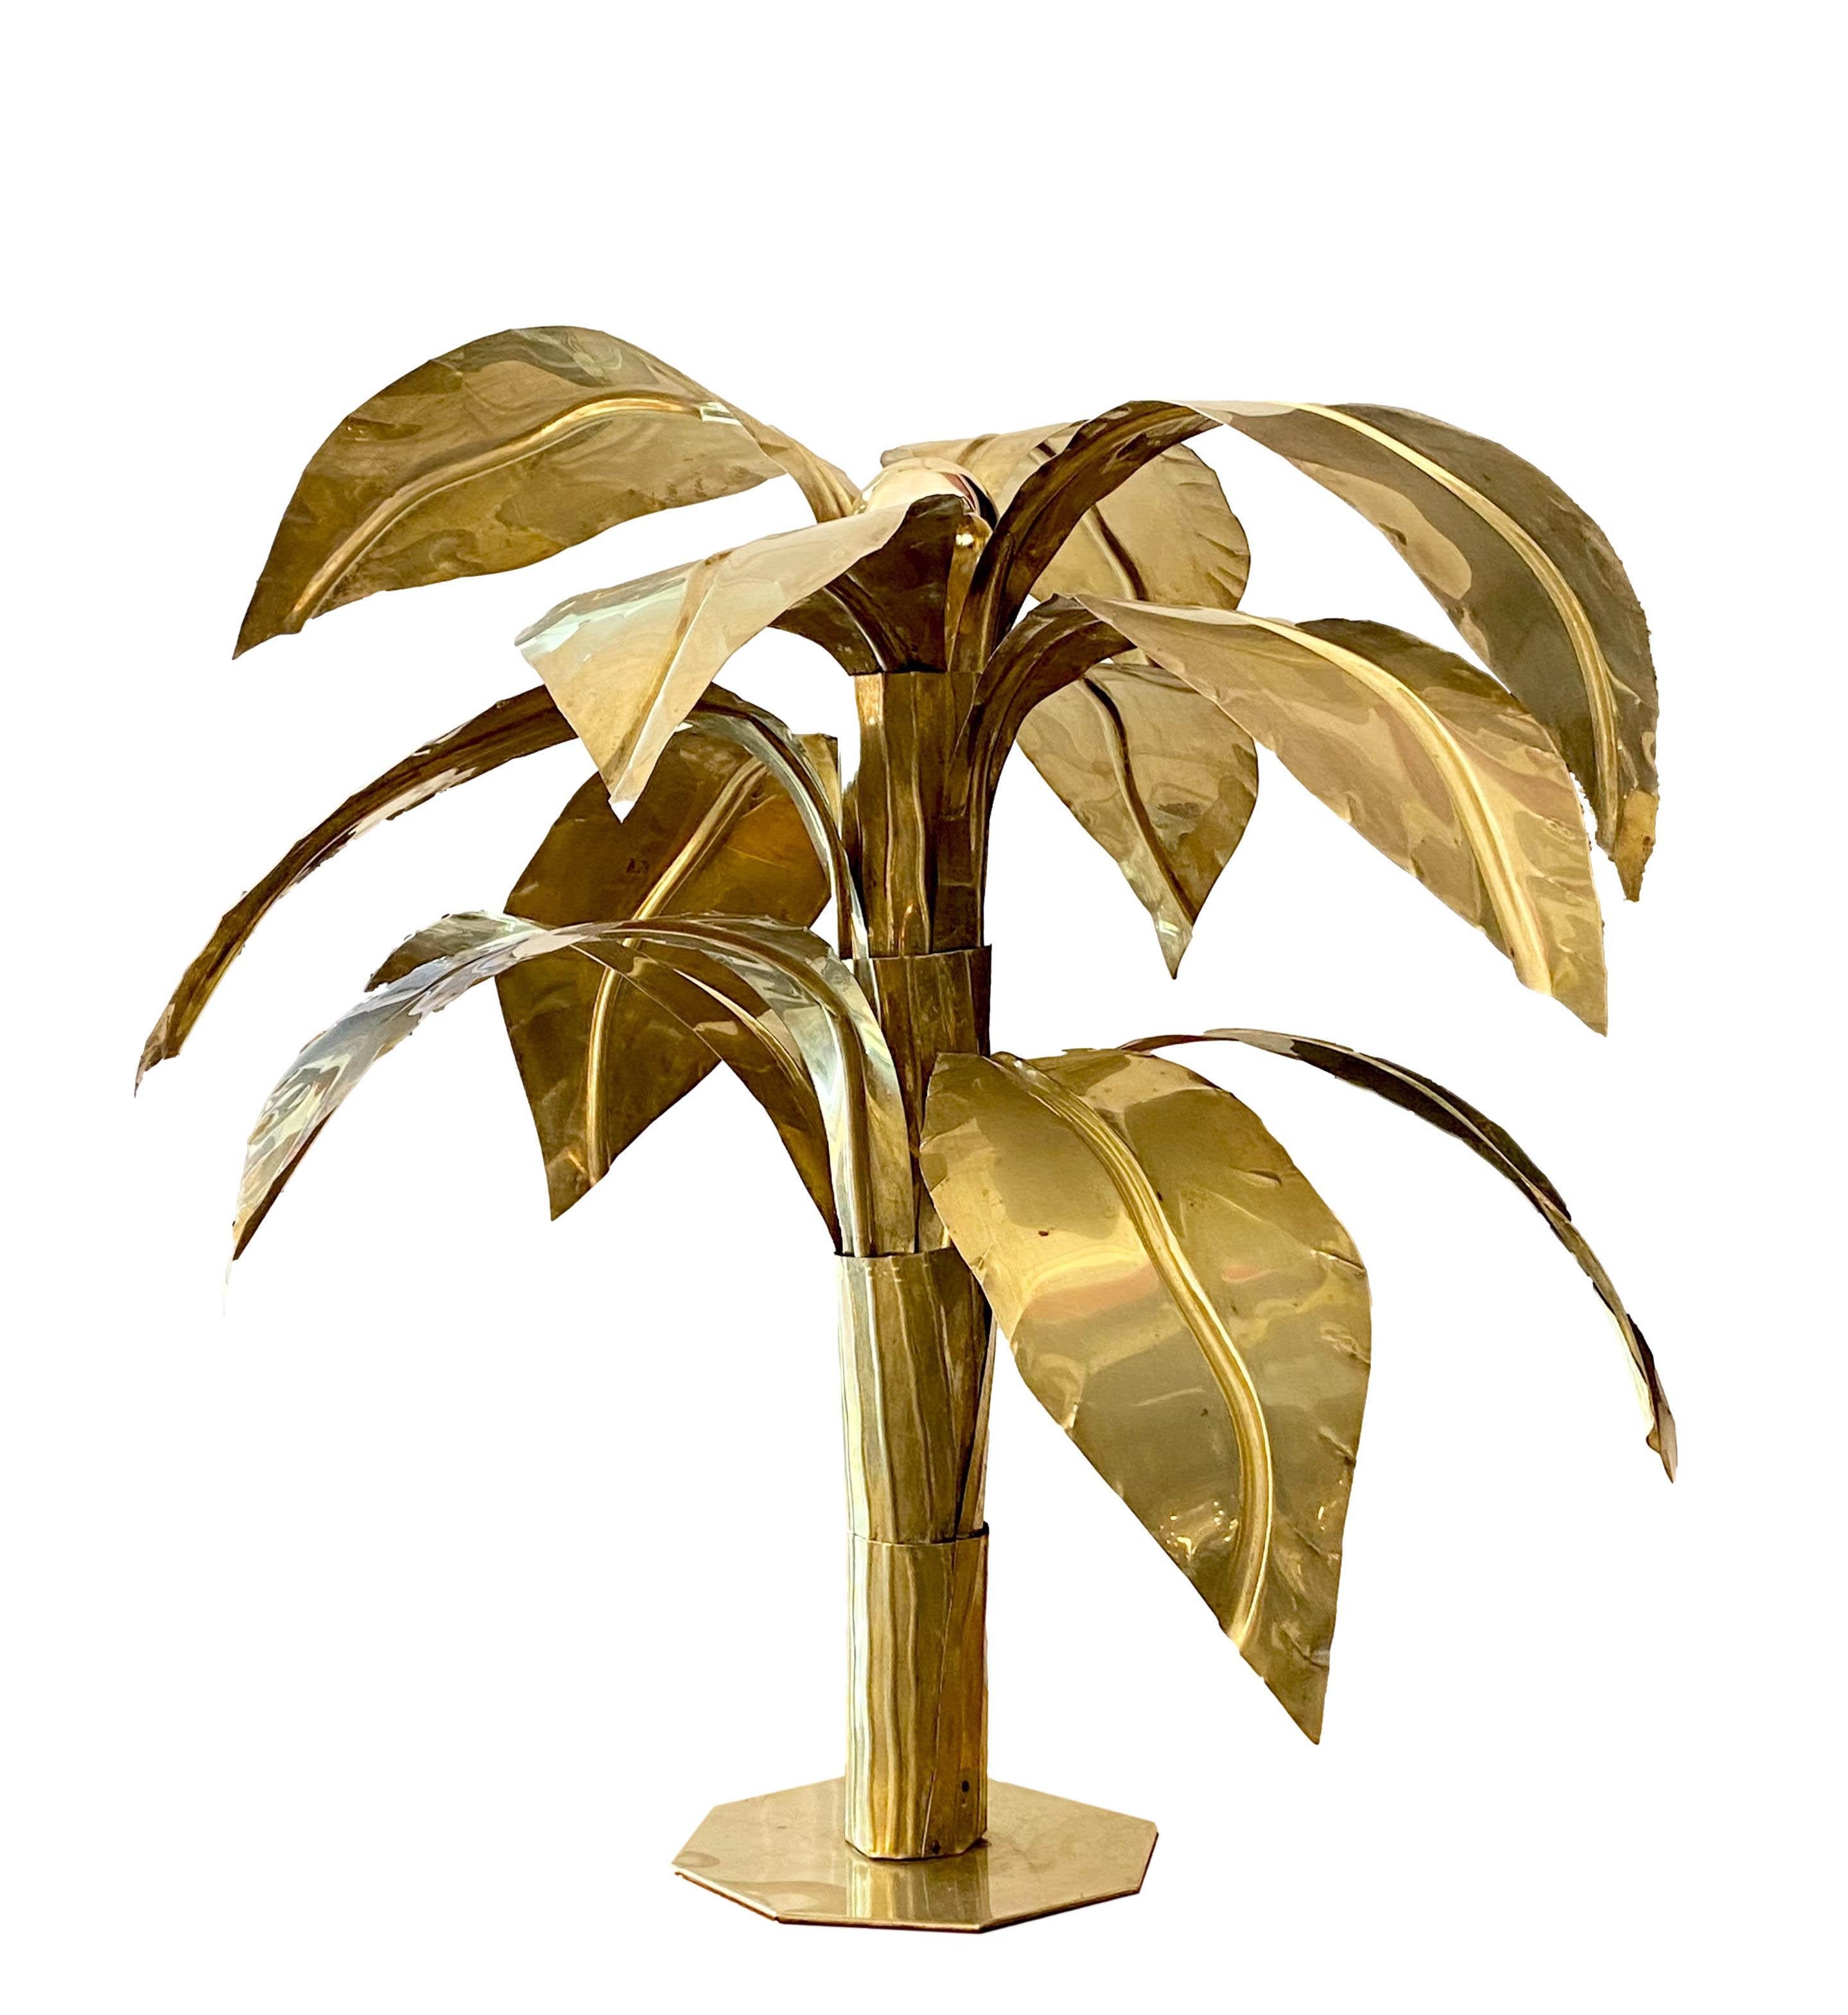 Rare 1970s Hollywood Regency style brass table lamp, similar to a palm tree.